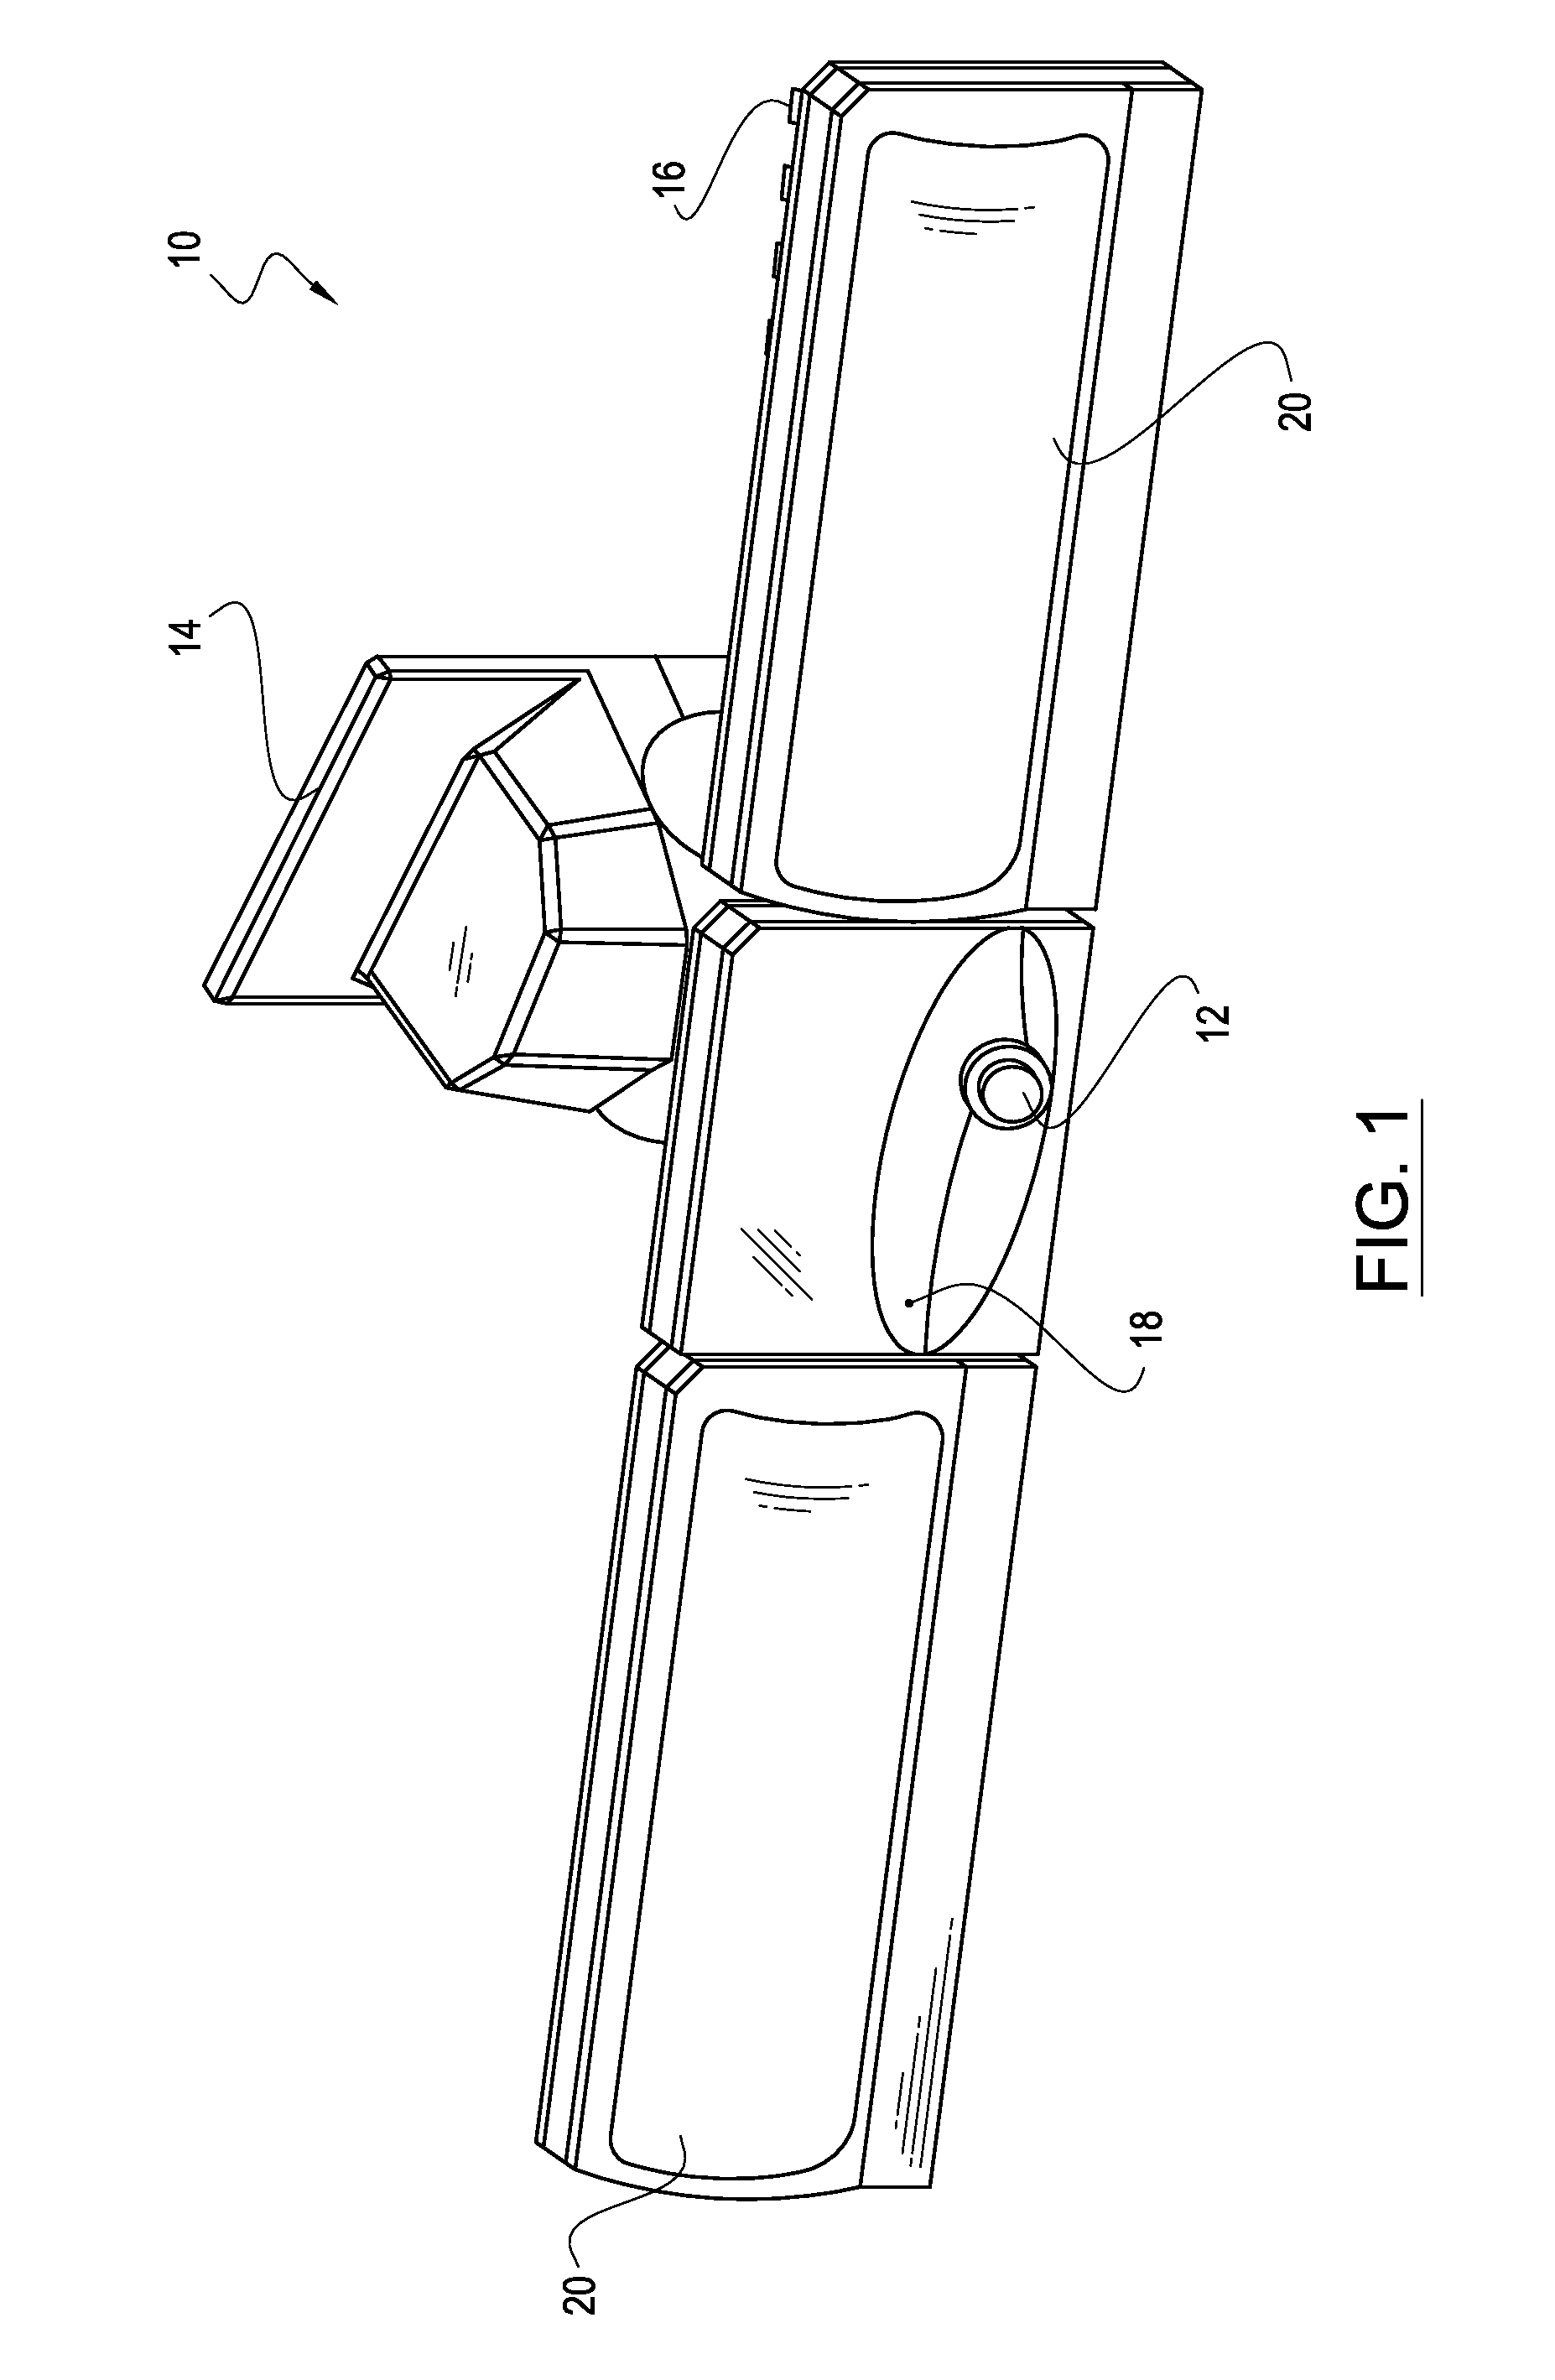 Self-Calibrating Multi-Directional Security Luminaire and Associated Methods